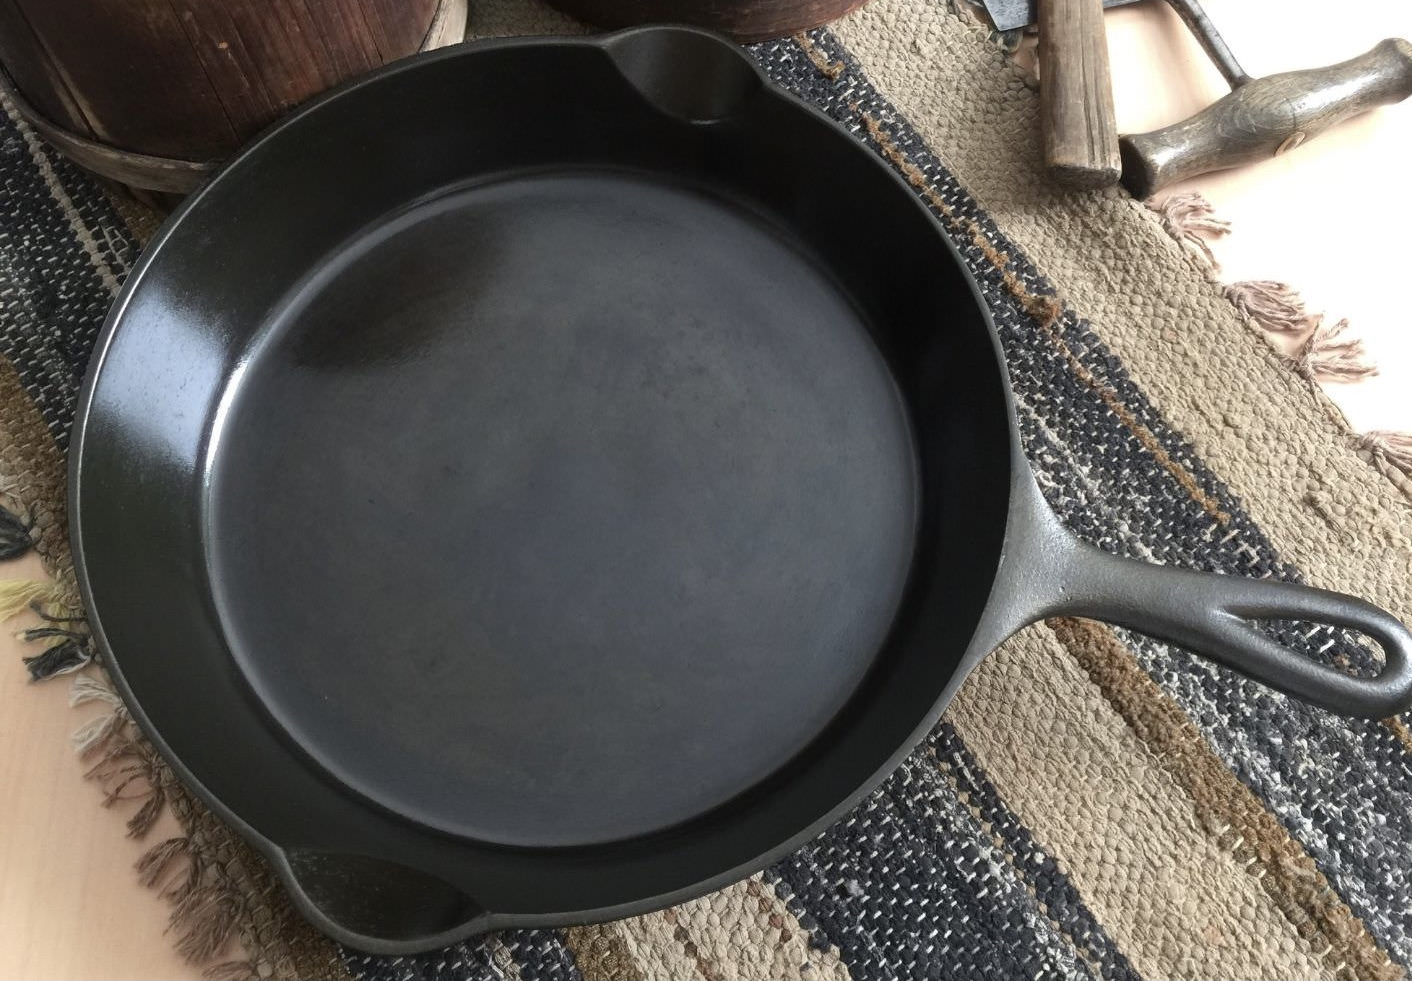 https://www.booniehicks.com/wp-content/uploads/2021/09/Where-can-you-buy-Griswold-Cast-Iron.jpg